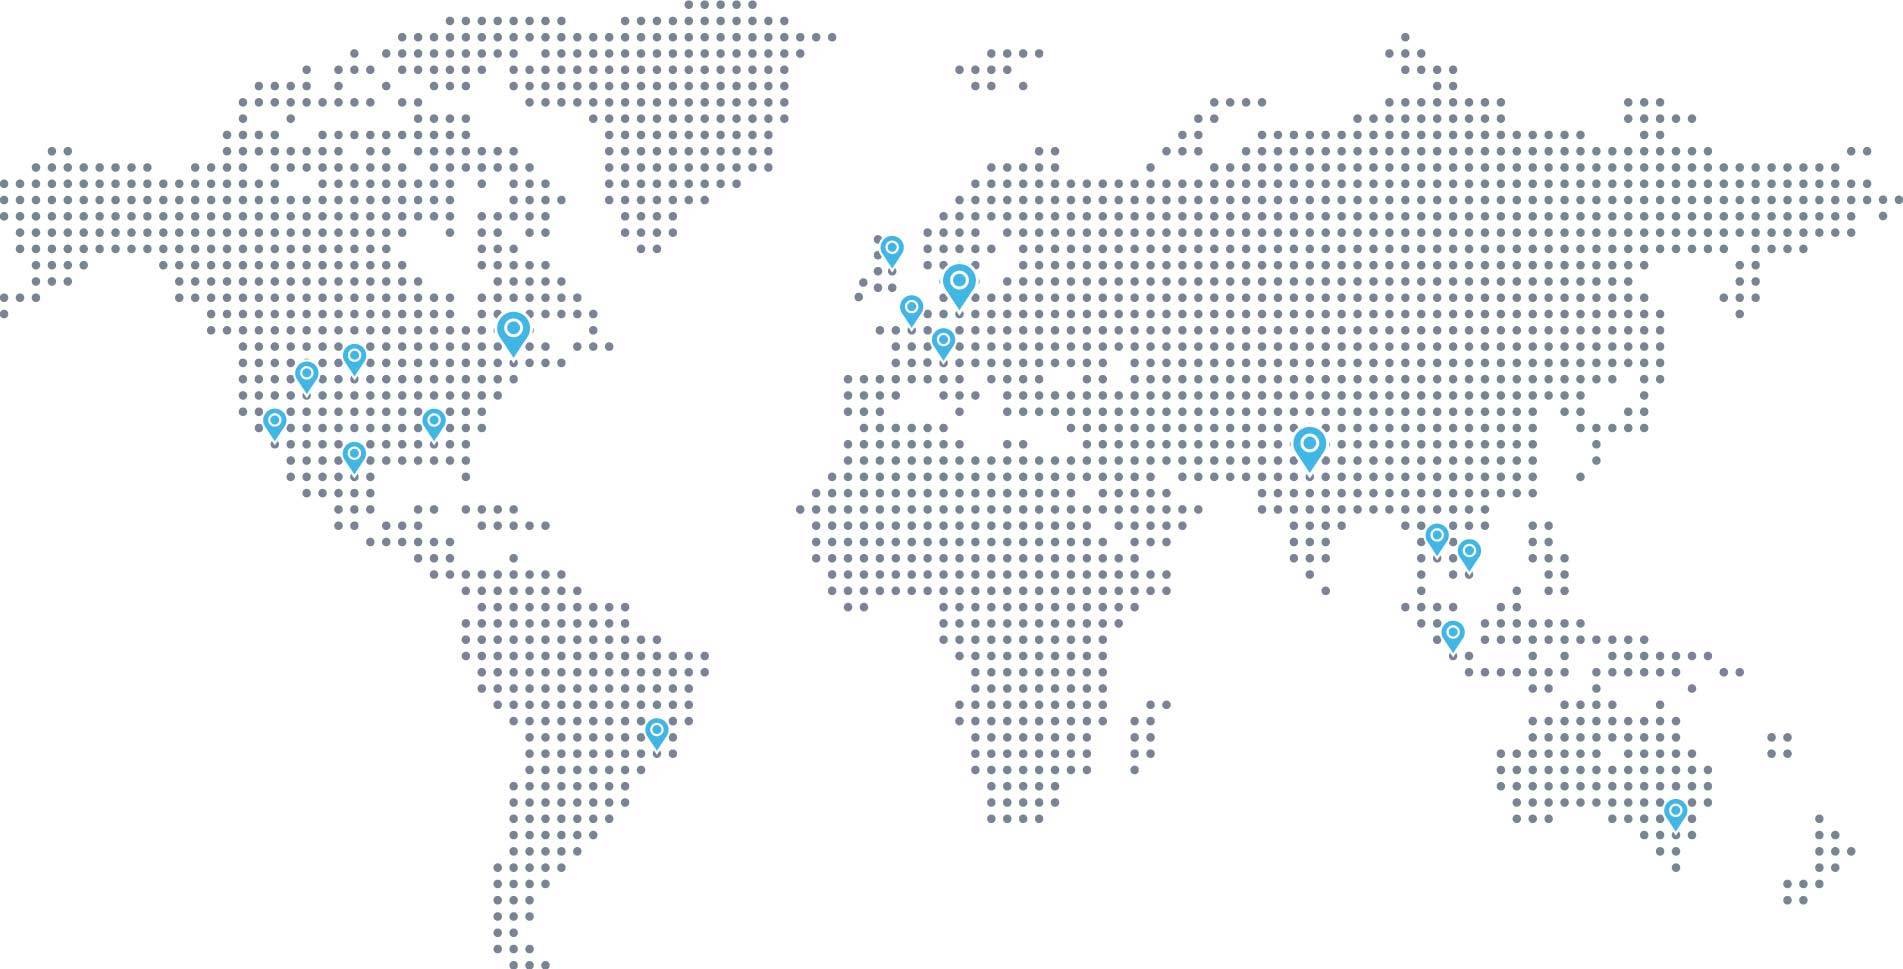 Premier Tech Systems and Automation worldwide locations